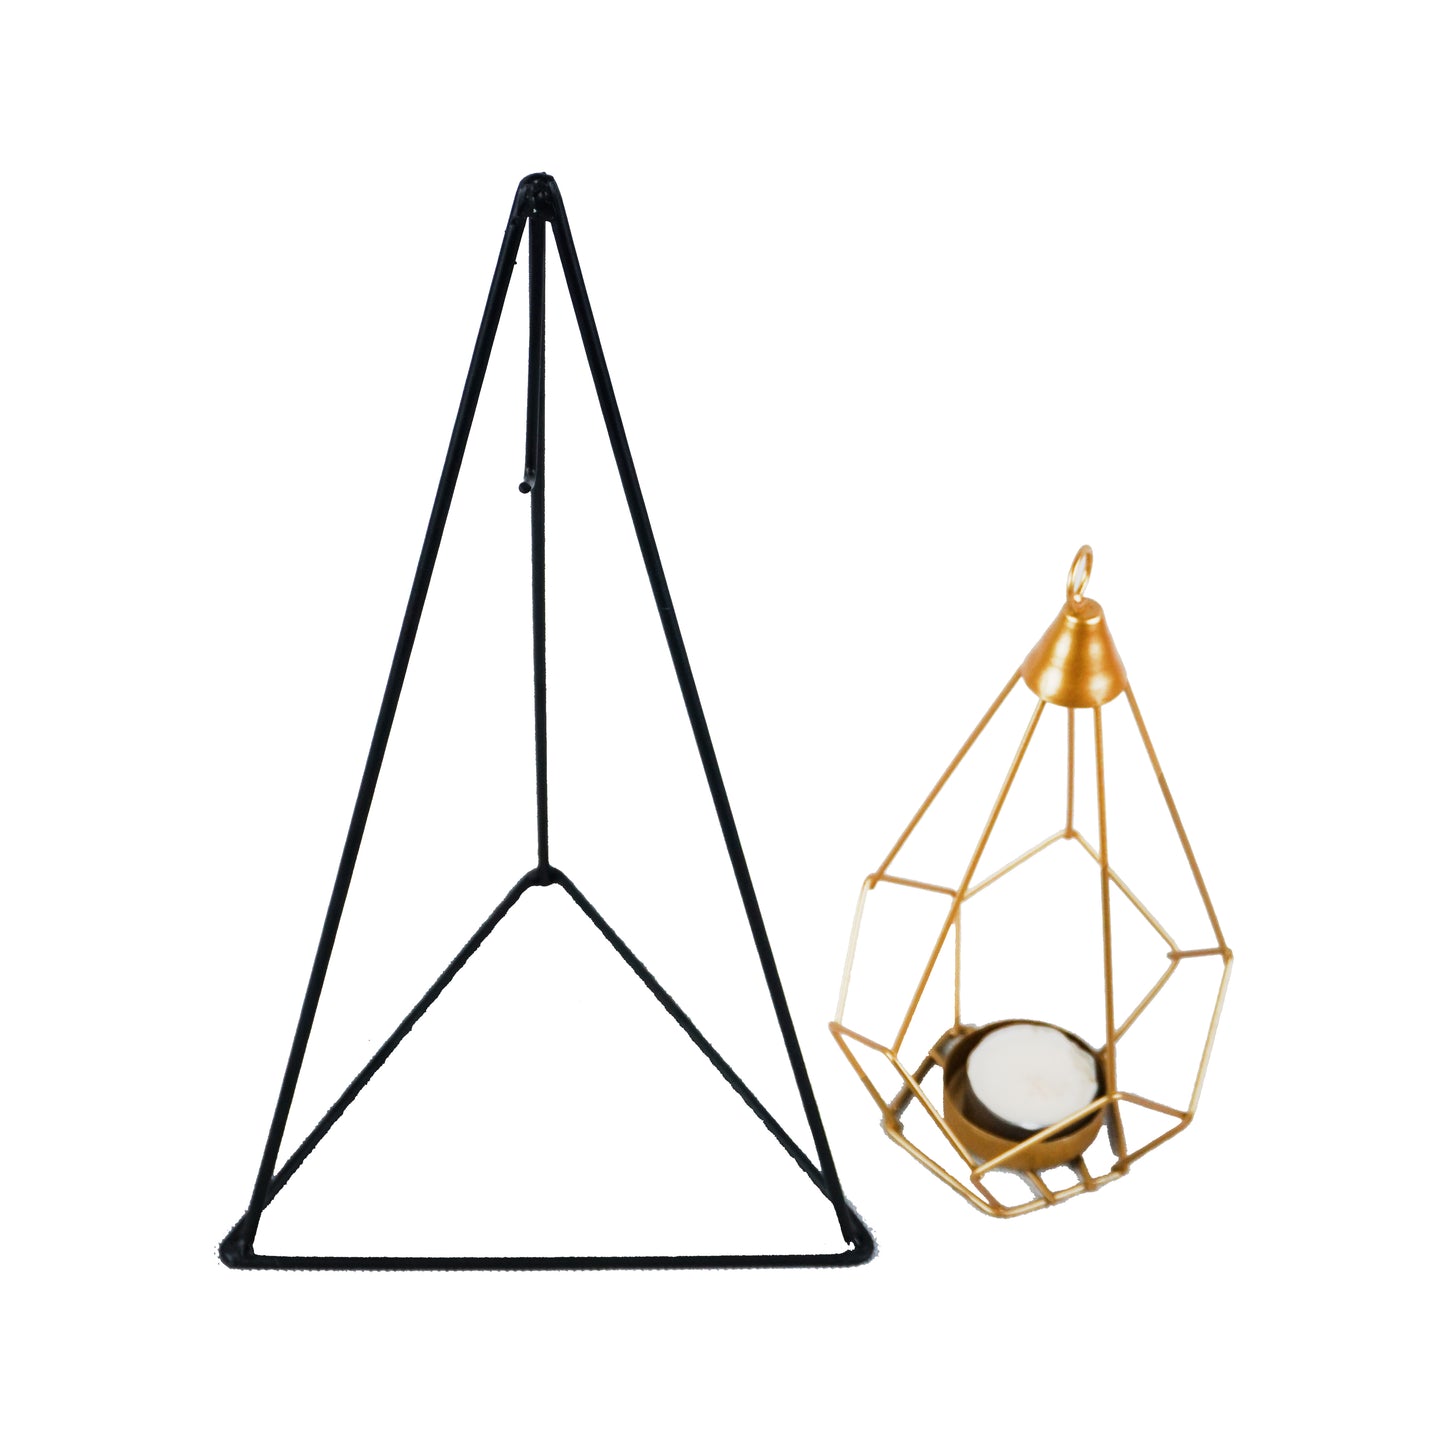 Iron Triangular Pyramid Shape Stand With Hanging Drop Tealight Candle Holder Centrepiece Decor